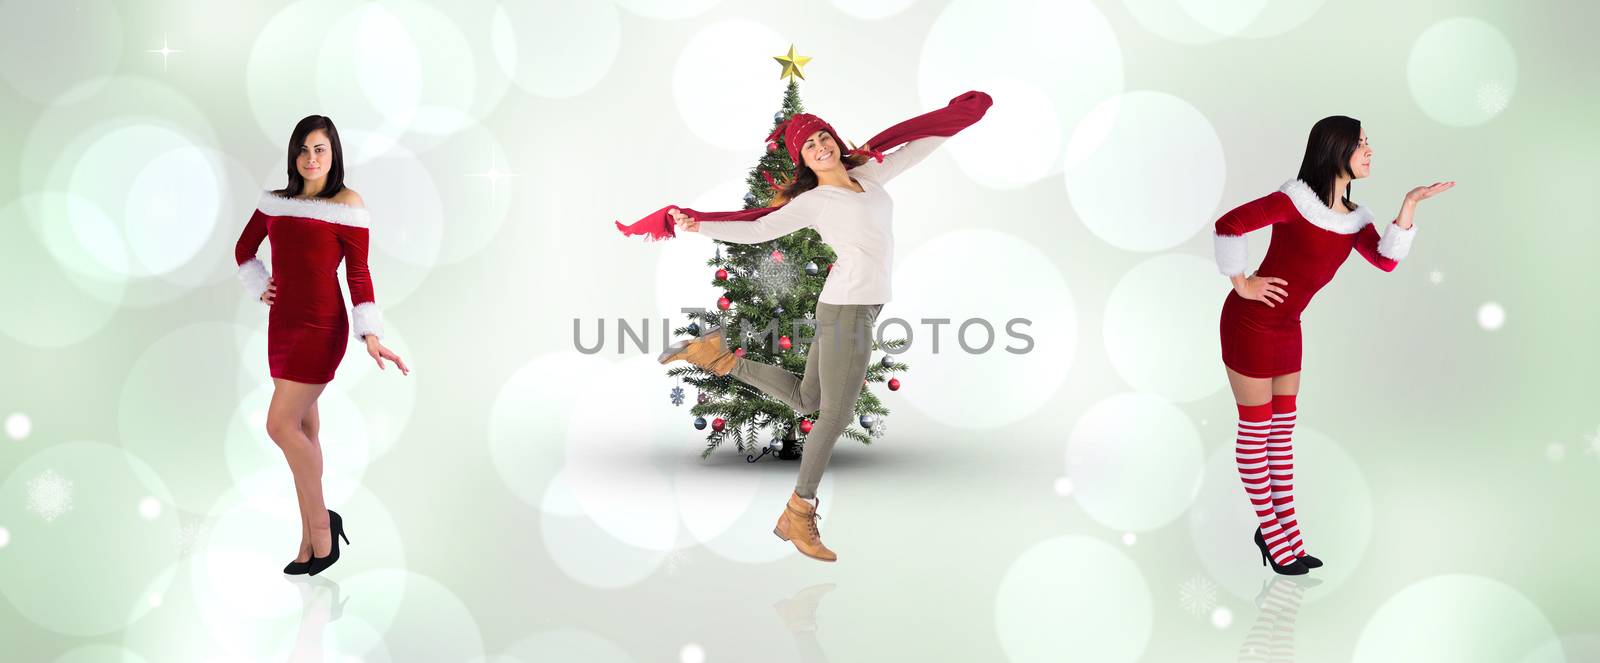 Composite image of different pretty girls in santa outfit against grey abstract light spot design